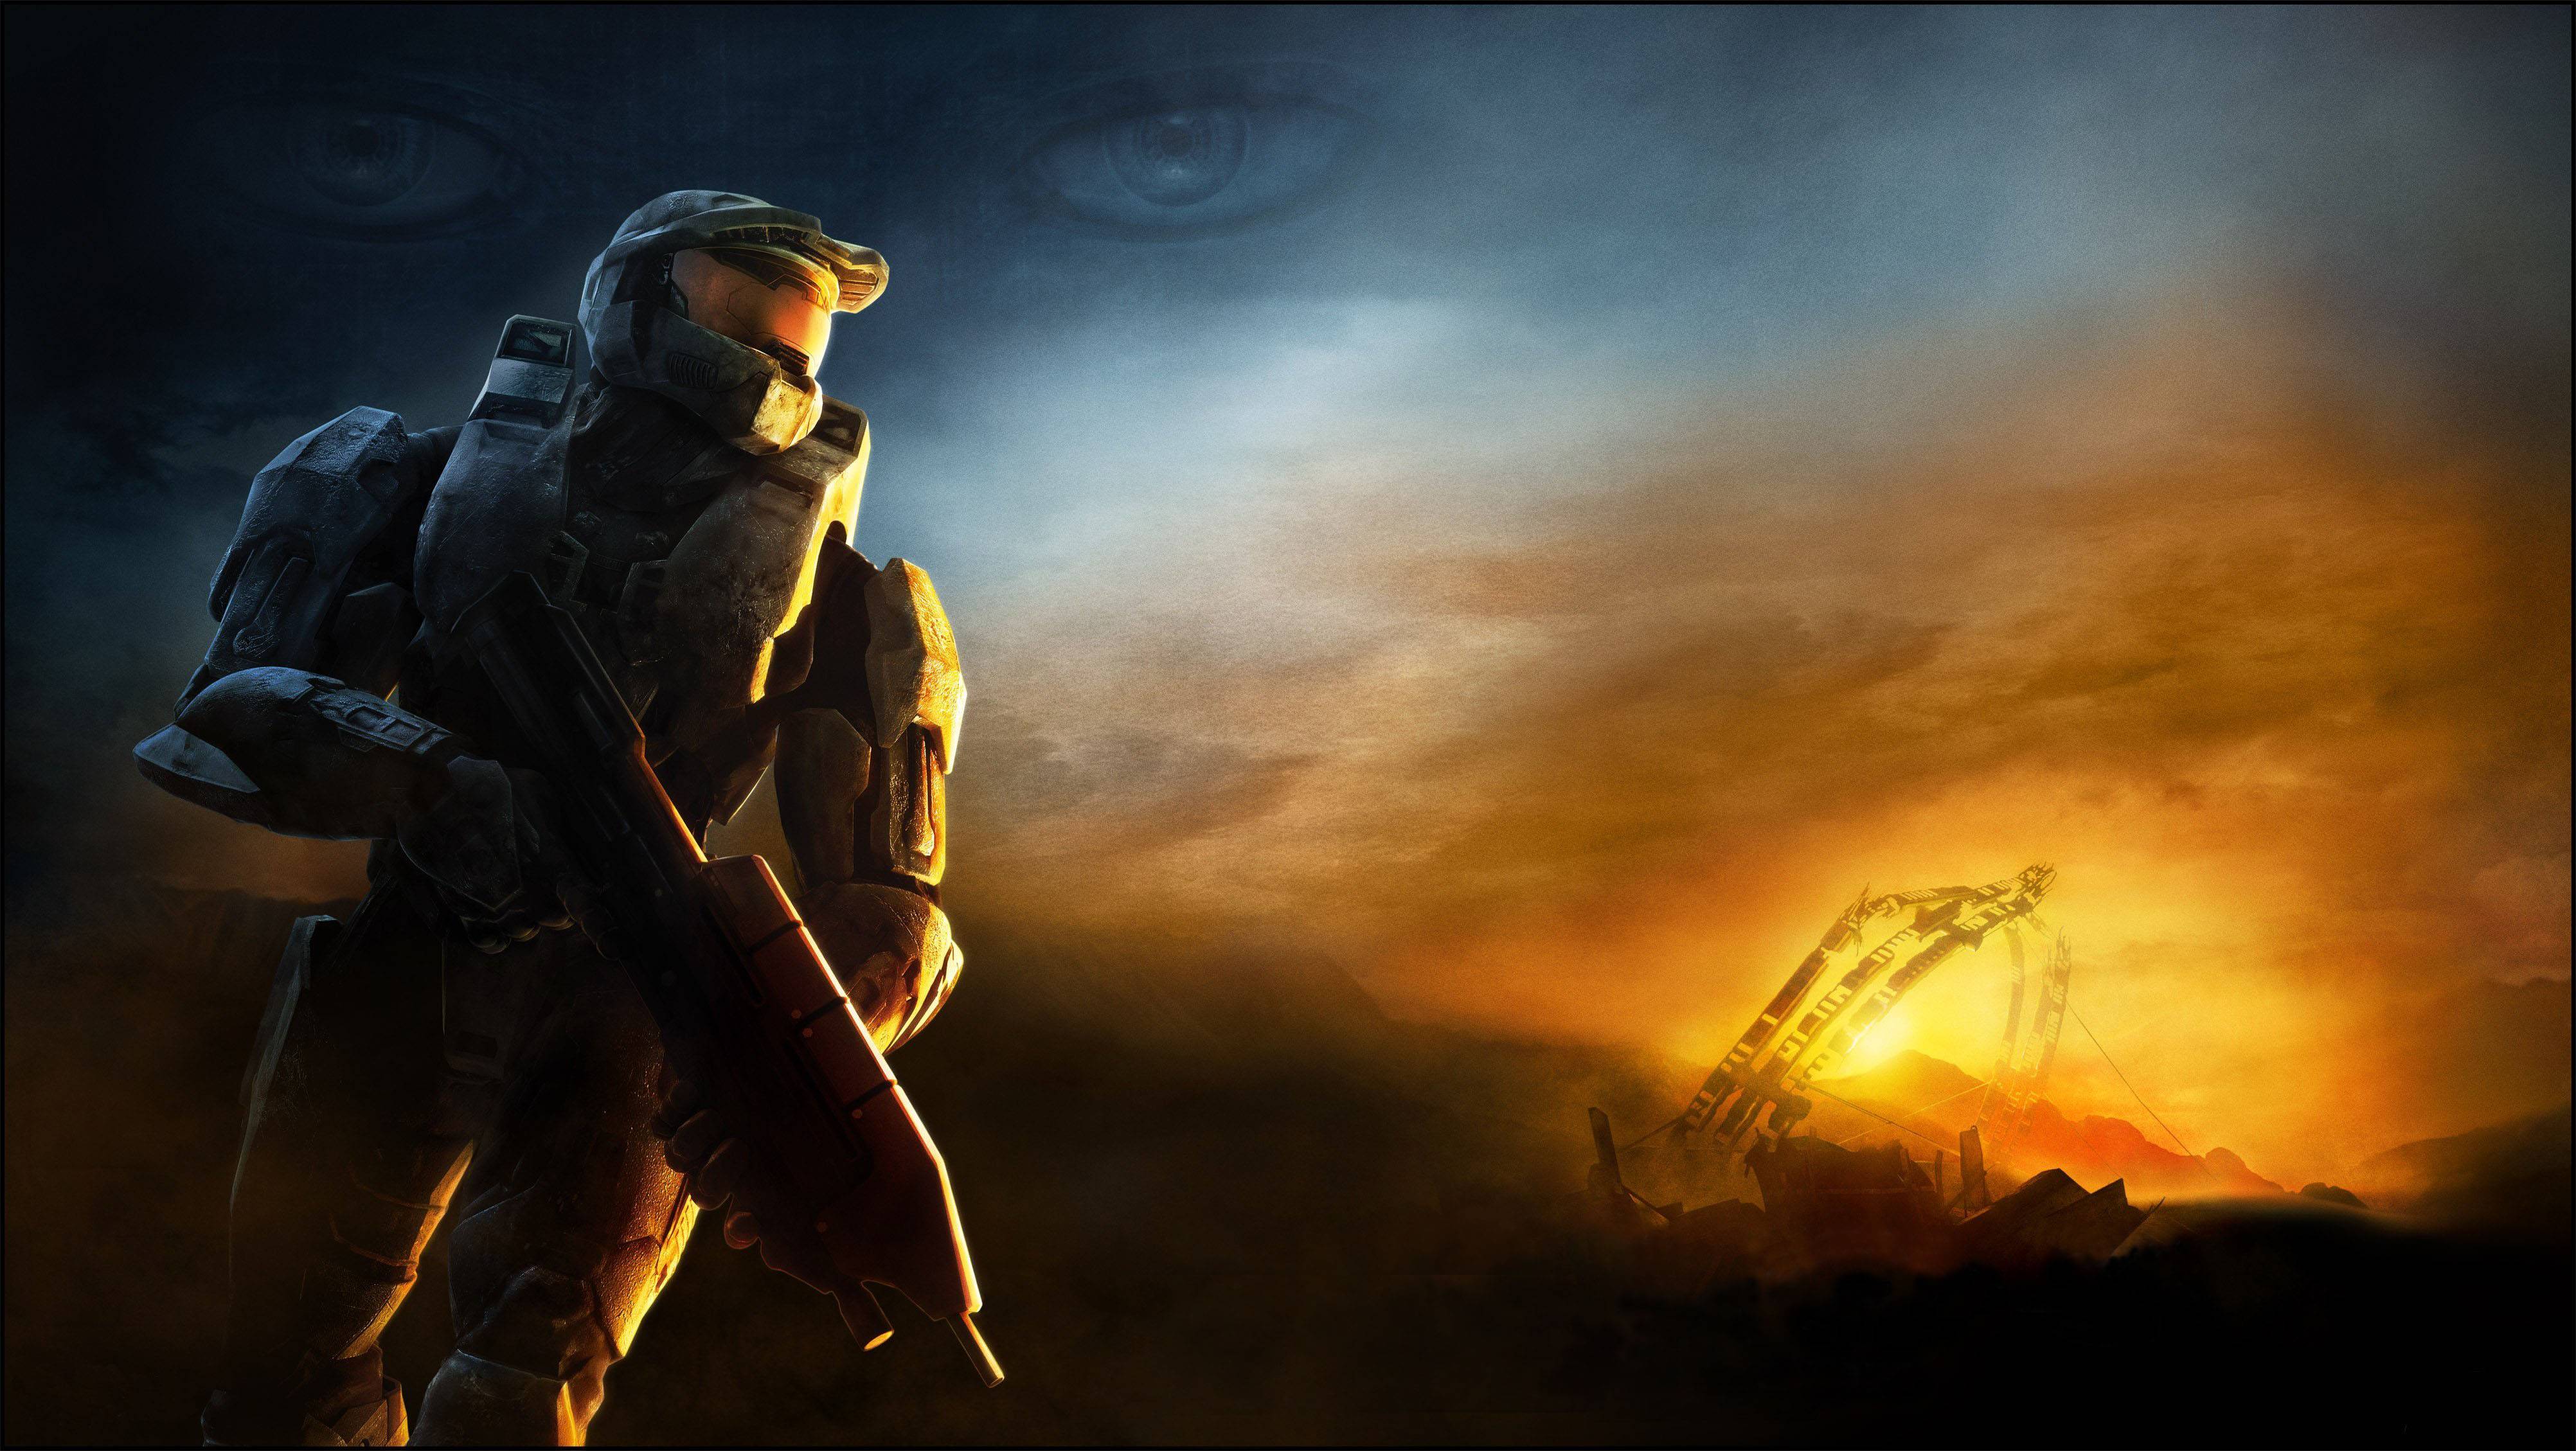 Halo Master Chief Wallpapers - Wallpaper Cave